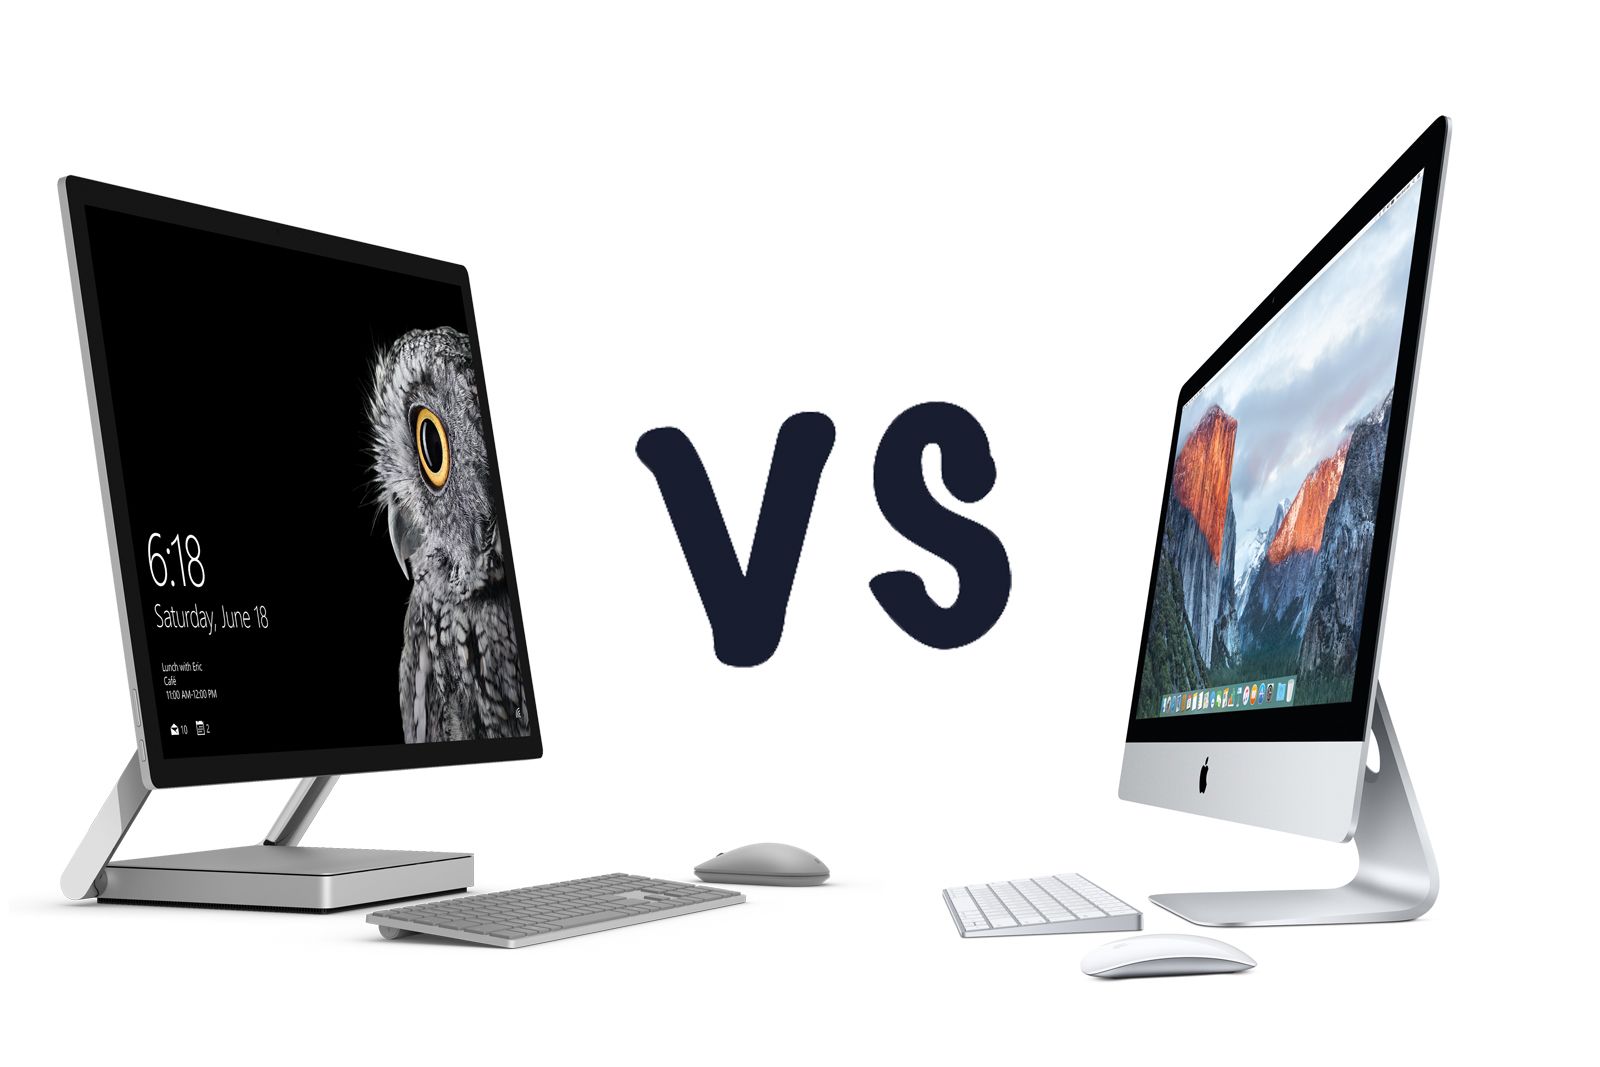 Microsoft Surface Studio vs Apple iMac: What's the difference?